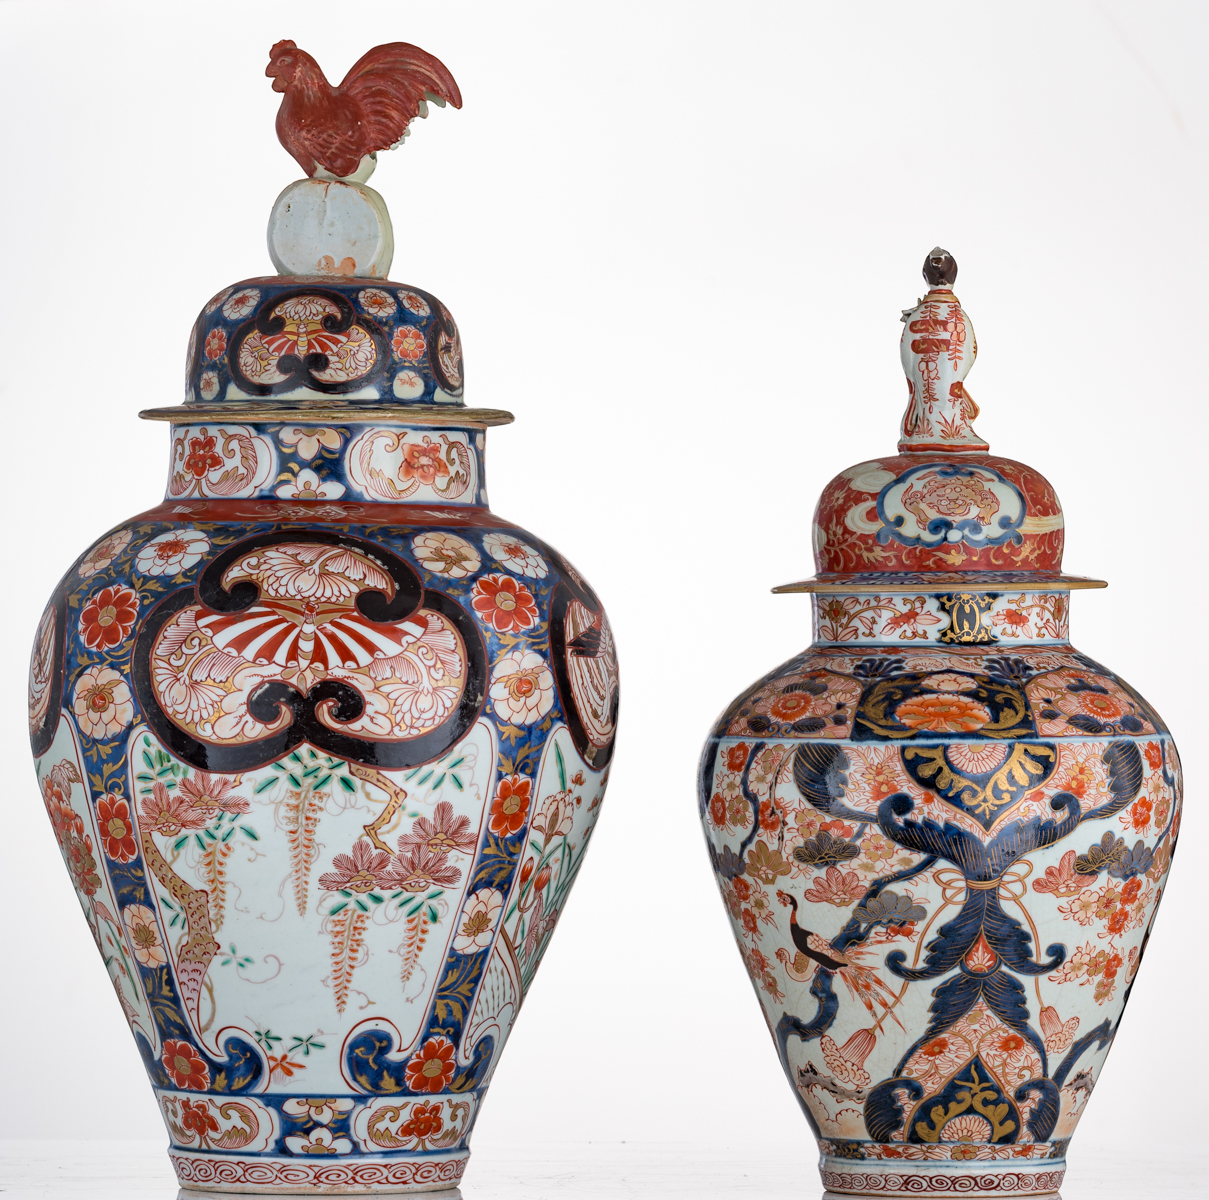 A Japanese Arita Imari covered jar, decorated with flower sprays and with panels, filled with wister - Image 3 of 6